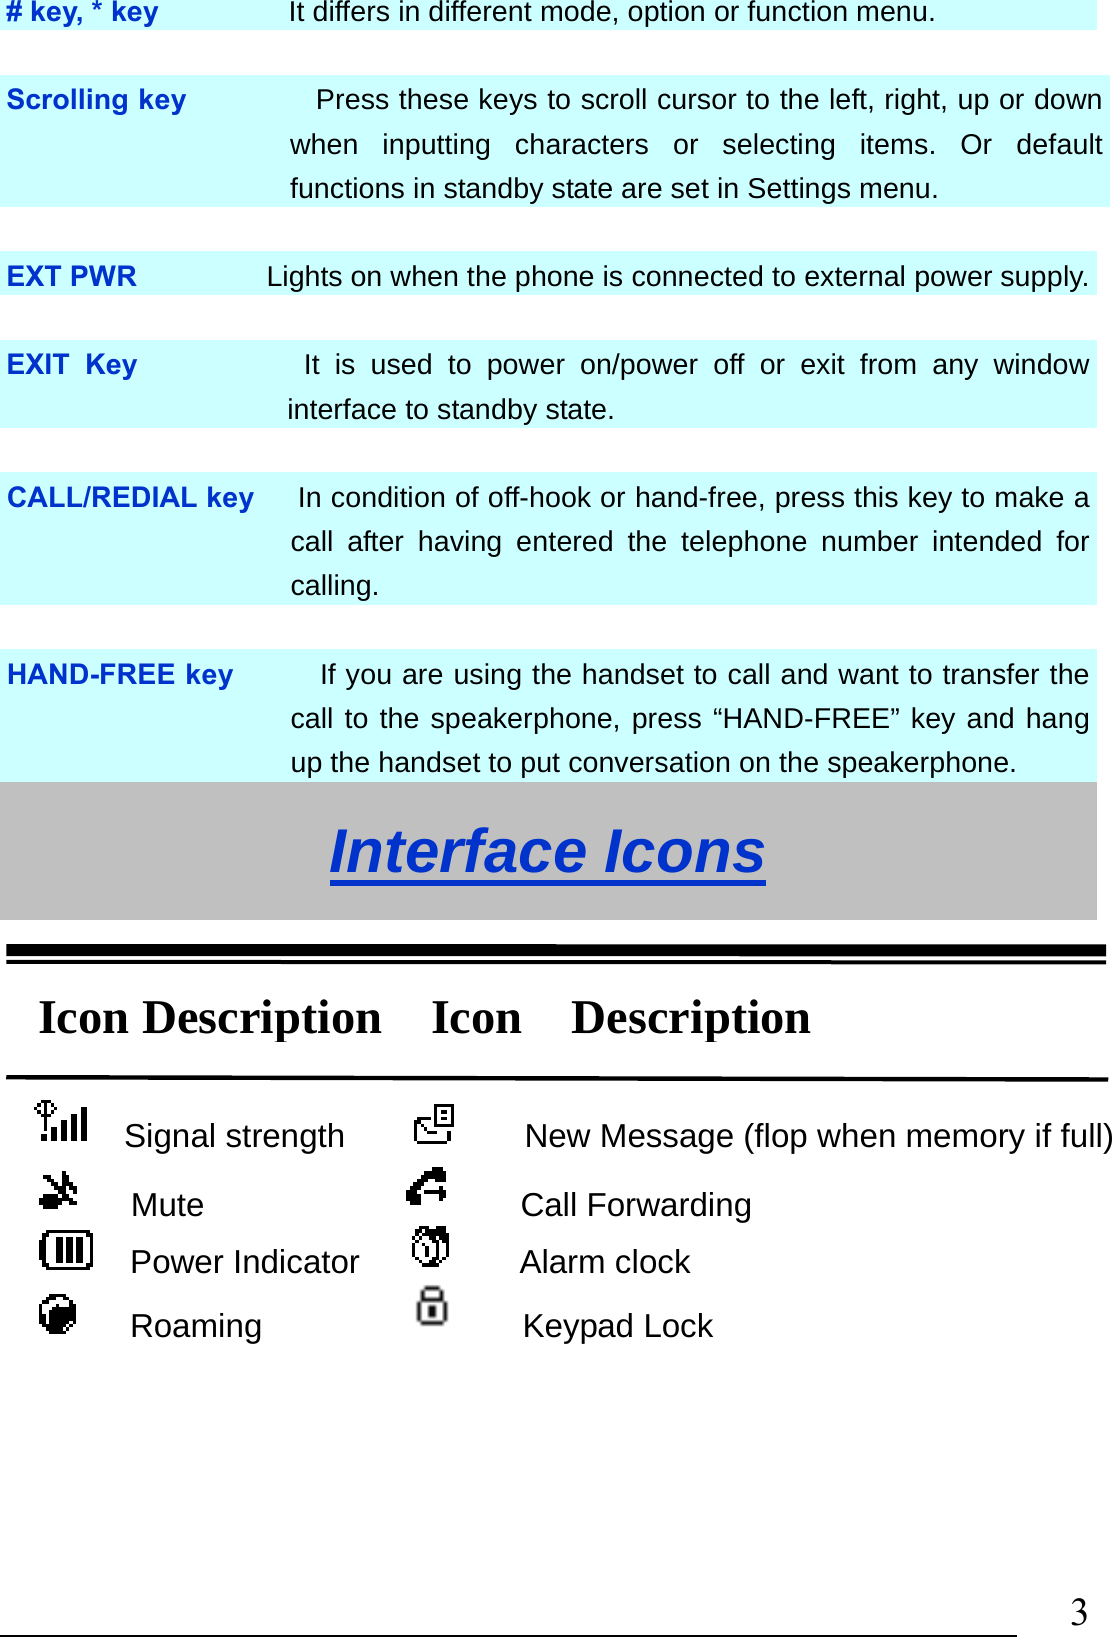                                3# key, * key         It differs in different mode, option or function menu.  Scrolling key         Press these keys to scroll cursor to the left, right, up or down when inputting characters or selecting items. Or default functions in standby state are set in Settings menu.  EXT PWR           Lights on when the phone is connected to external power supply. EXIT Key           It is used to power on/power off or exit from any window interface to standby state.  CALL/REDIAL key      In condition of off-hook or hand-free, press this key to make a call after having entered the telephone number intended for calling.  HAND-FREE key       If you are using the handset to call and want to transfer the call to the speakerphone, press “HAND-FREE” key and hang up the handset to put conversation on the speakerphone. Interface Icons       Signal strength                New Message (flop when memory if full)    Mute                 Call Forwarding   Power Indicator        Alarm clock    Roaming              Keypad Lock Icon Description  Icon  Description 